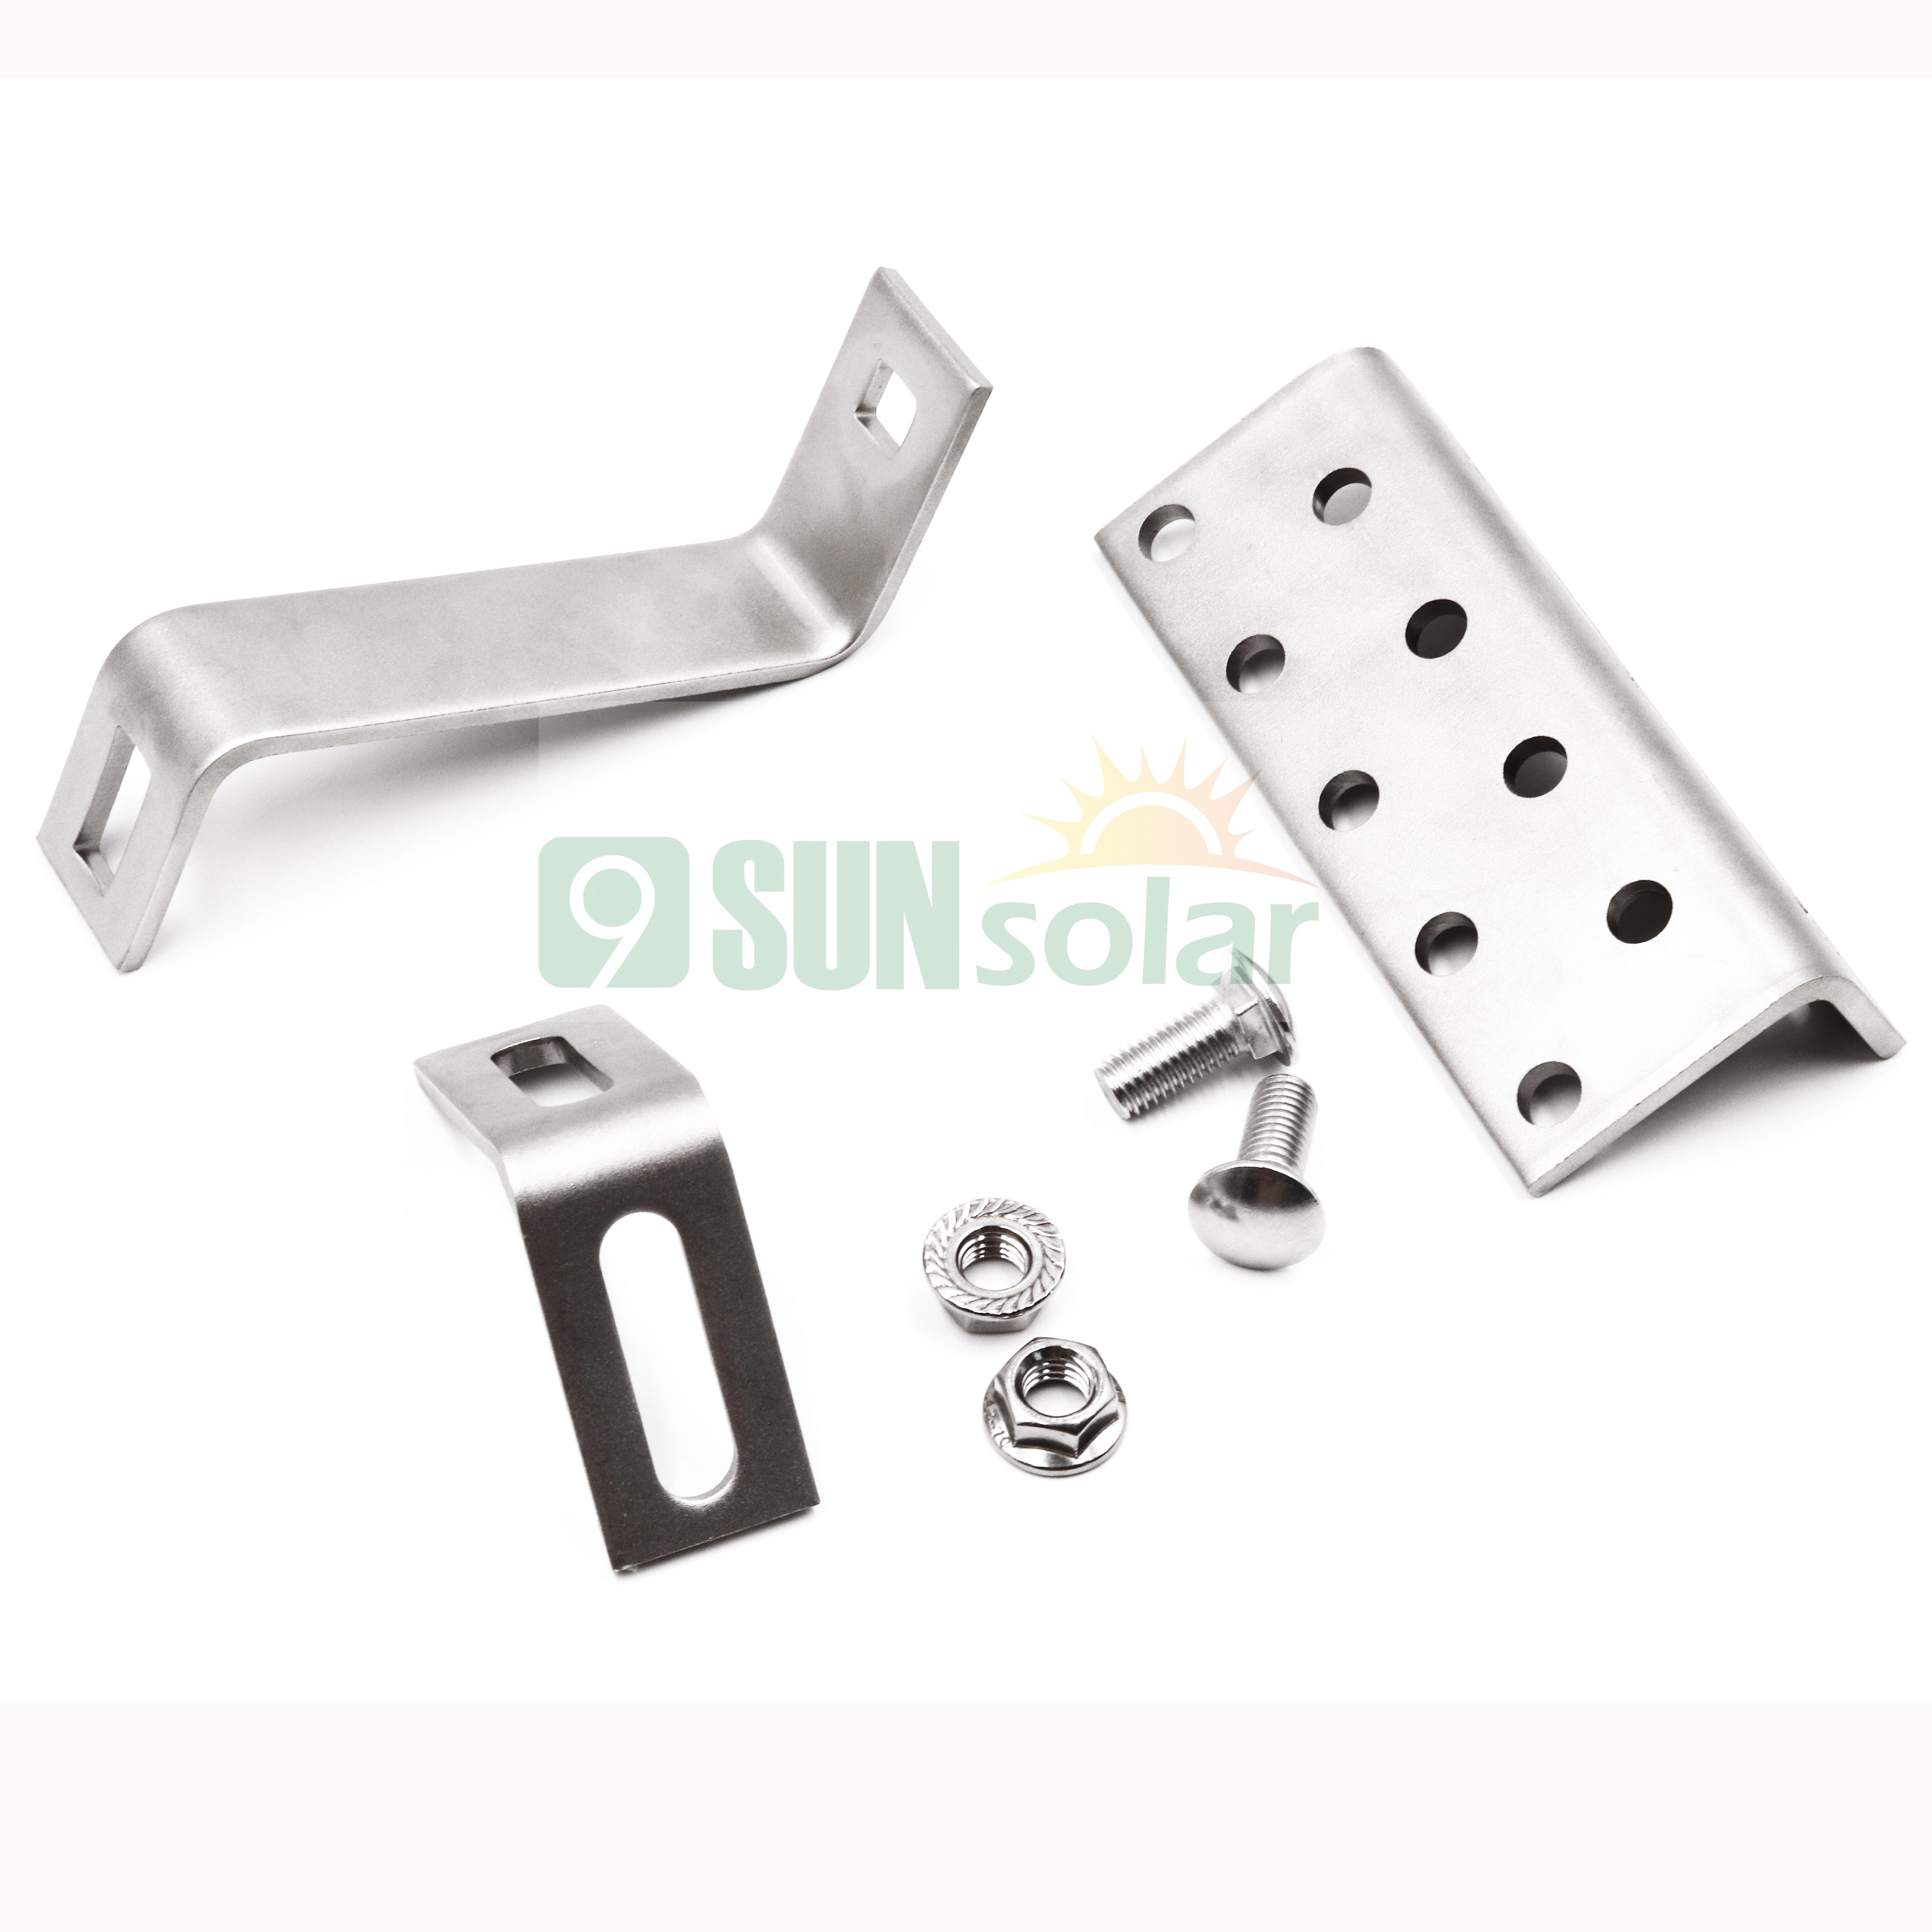 Top Mounting System Aluminum Rail Pitch Tile Roof Solar Photovoltaic Panel Support Bracket solar roof hook